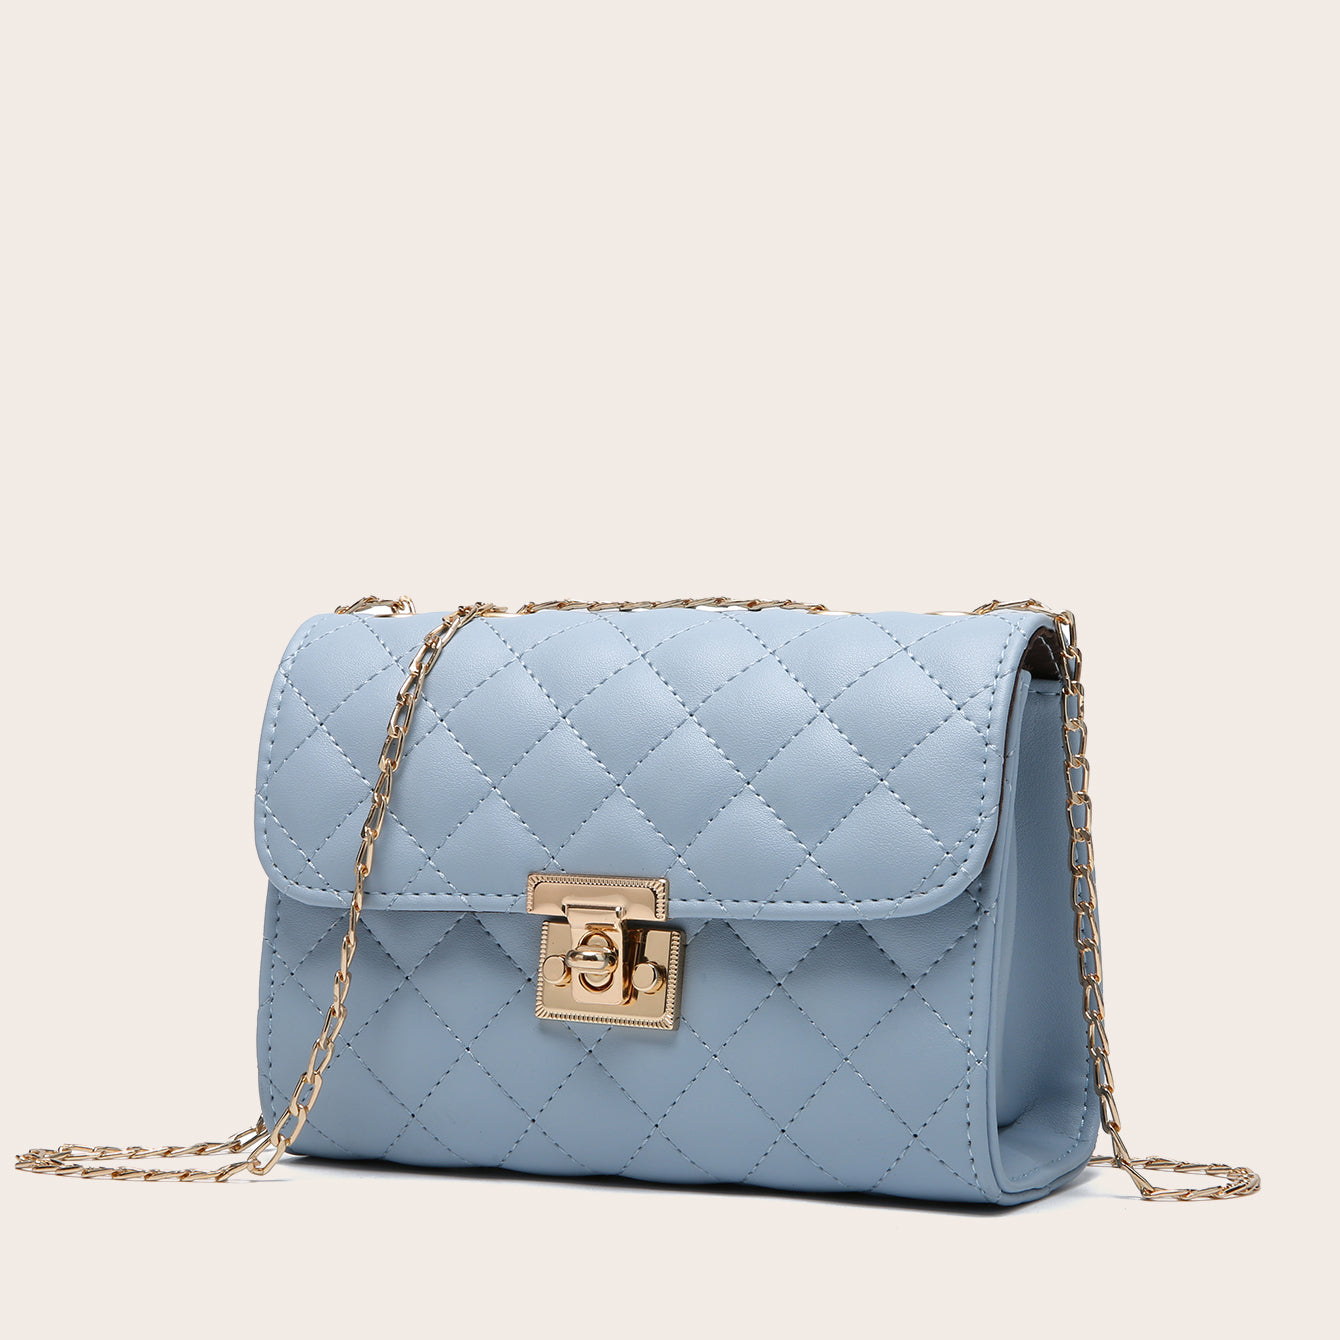 Ladies Quilted Crossbody Bag, Fashionable Chain Clutch Bag, Shoulder Bag, Square Bag